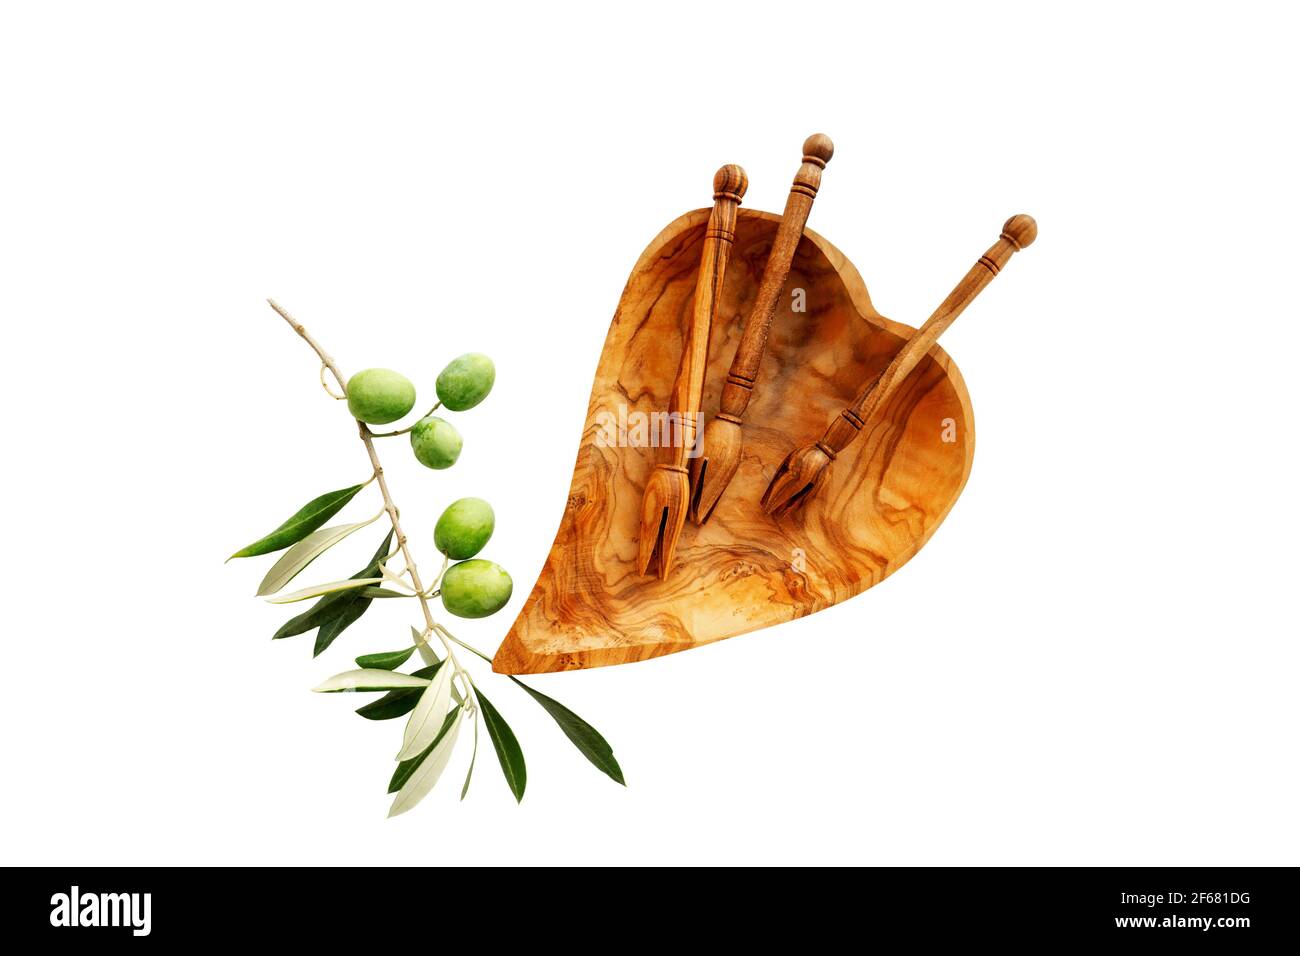 dishes made of olive wood. Eco-friendly choice and friendly nature. concept of a world without plastic and a clean planet. Wooden dishes and a heart-s Stock Photo